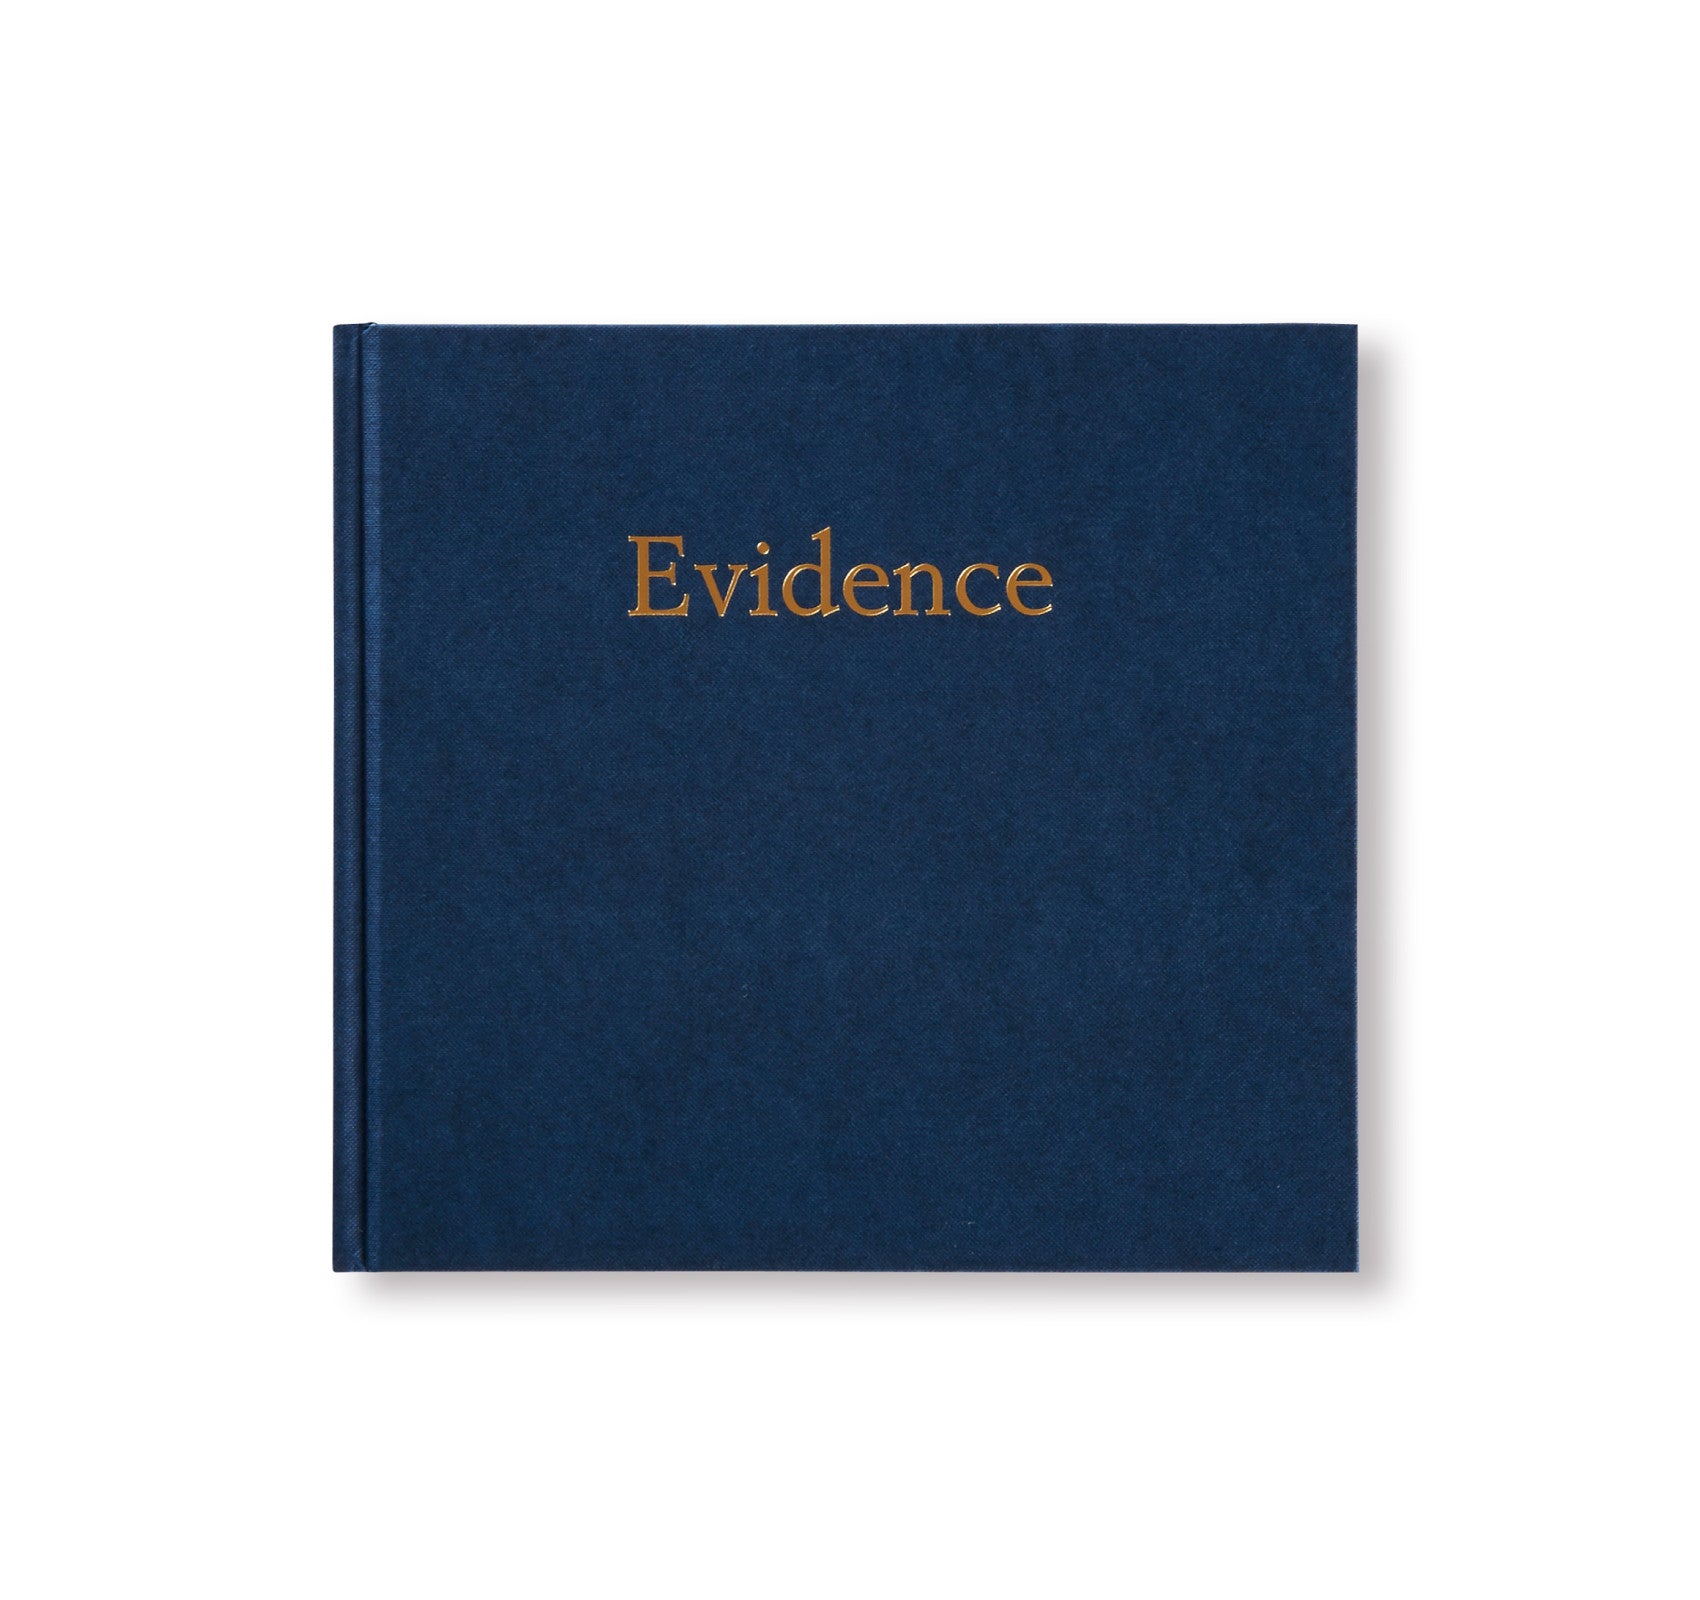 EVIDENCE by Larry Sultan & Mike Mandel